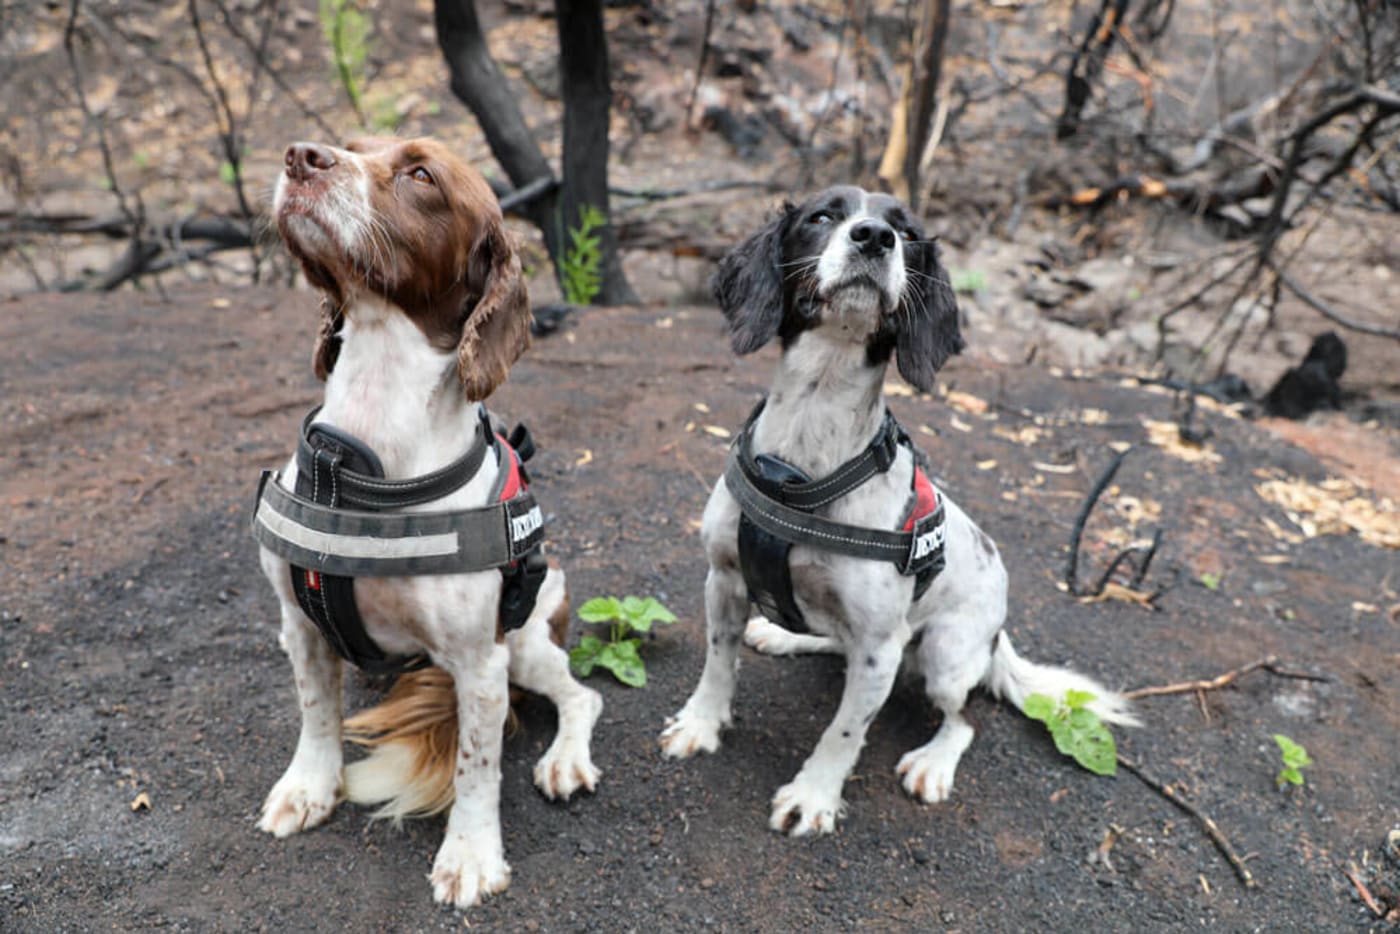 Detection dogs Taz (liver and white) and her cousin Missy (black and white) from OWAD Environment.